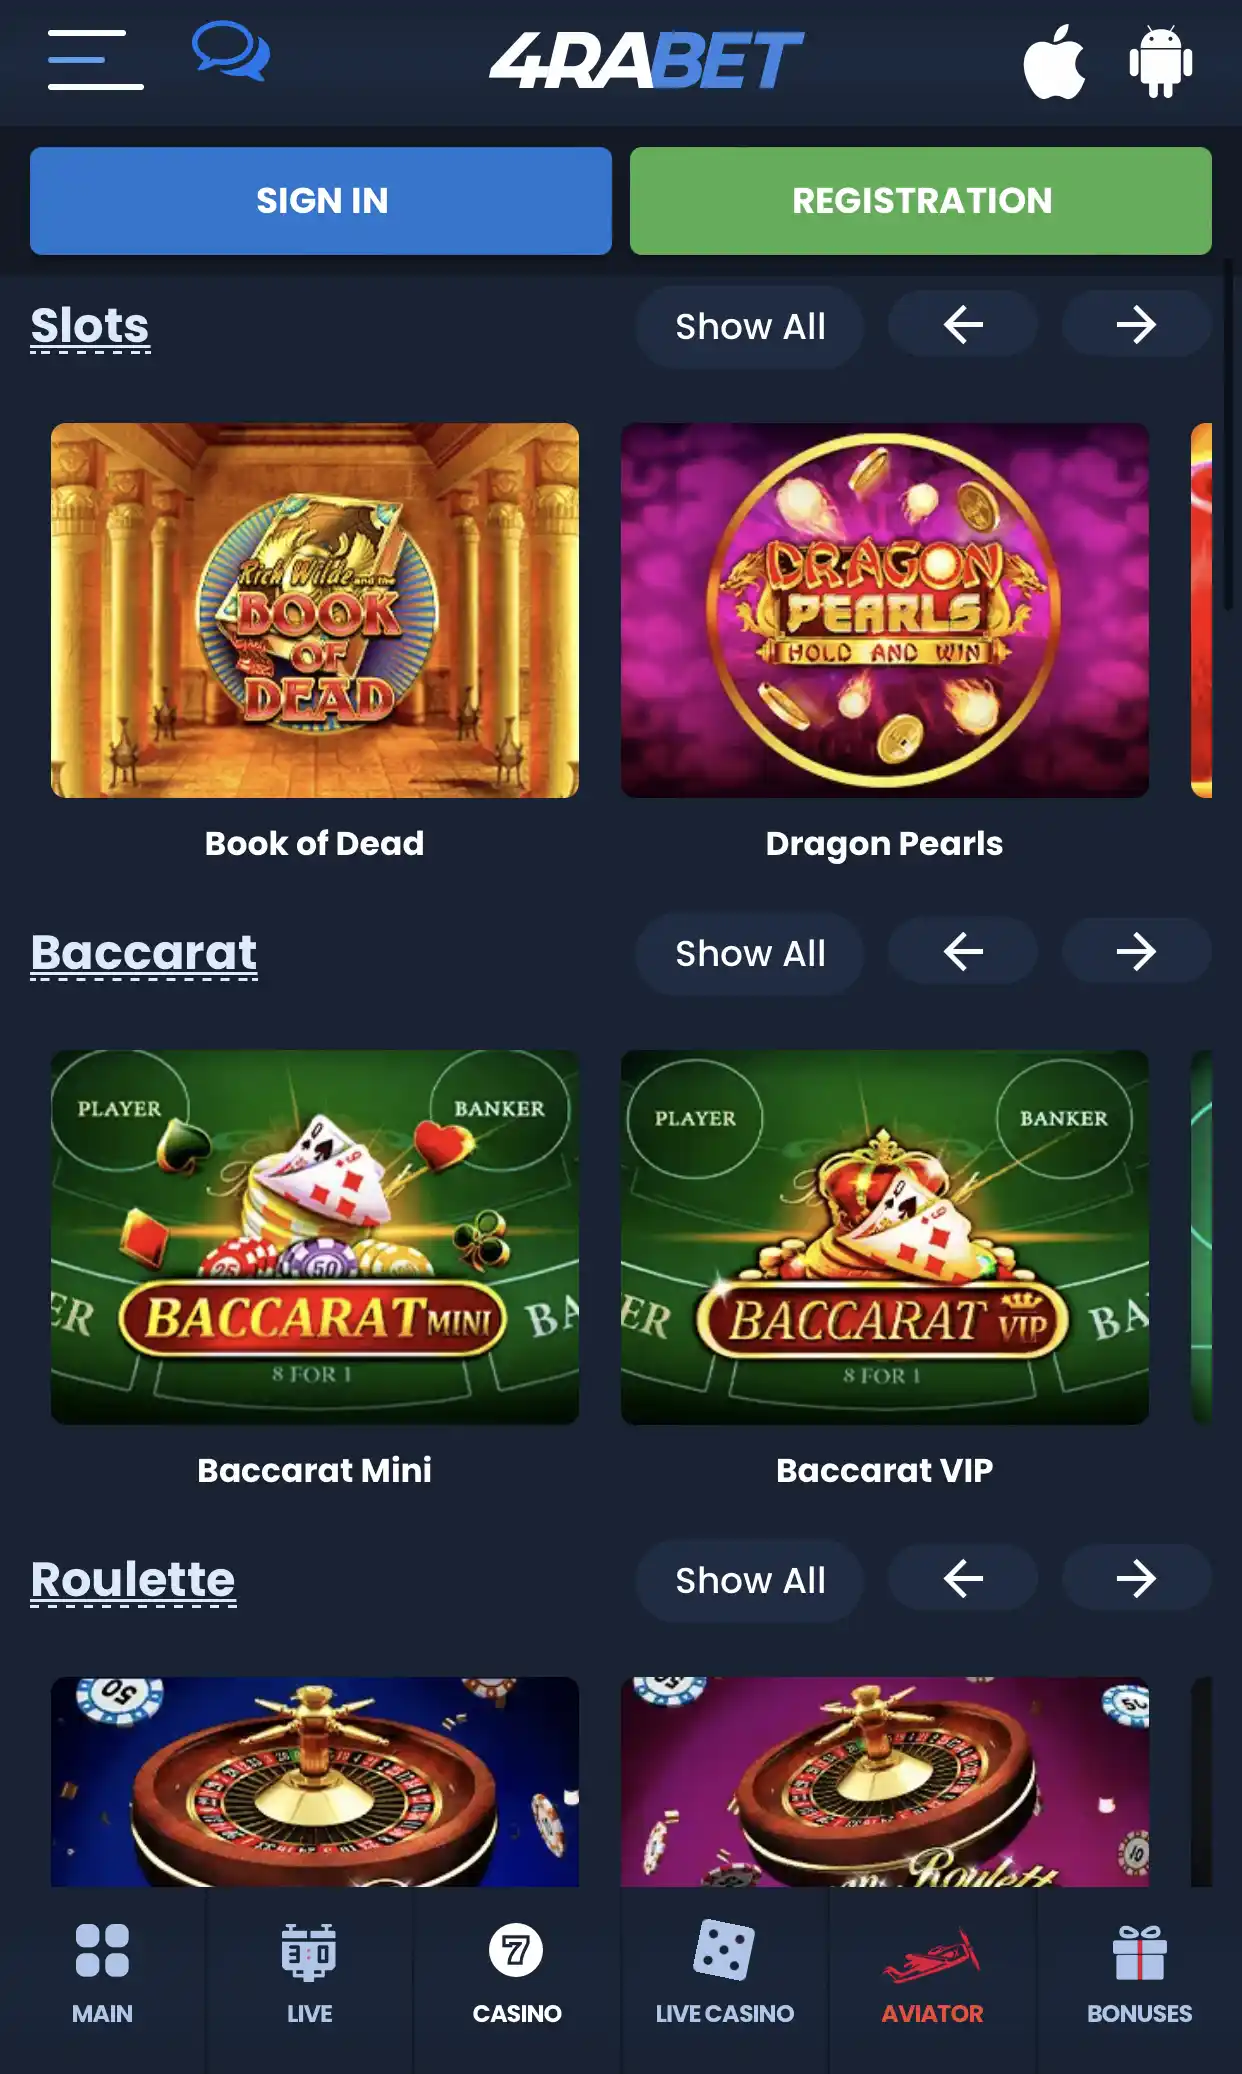 Choose your favorite game among the most popular 4rabet casino games.